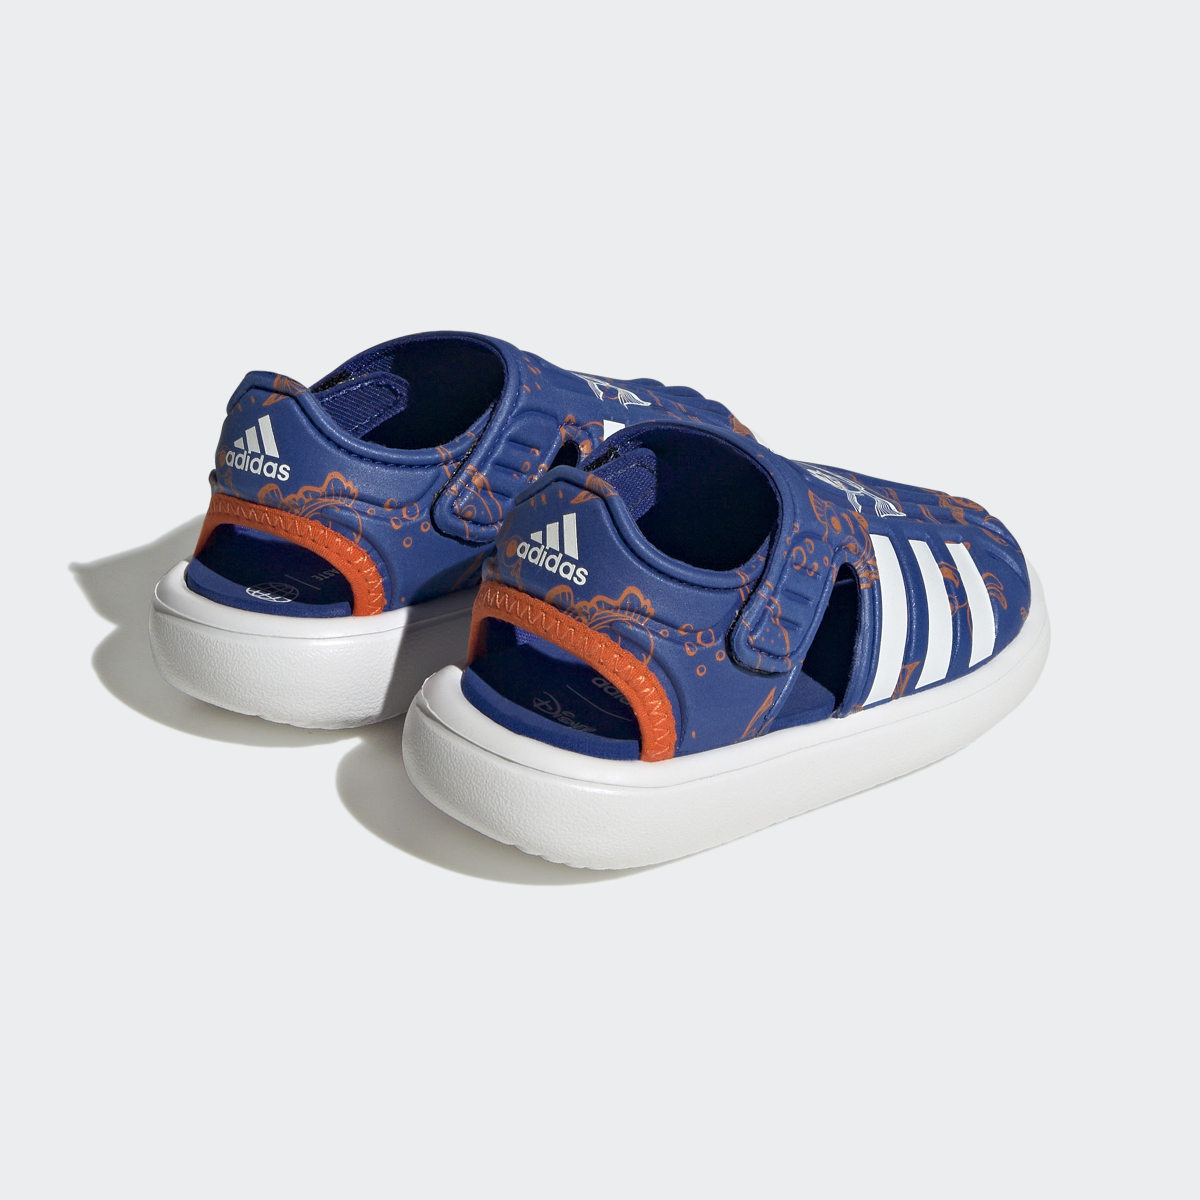 Adidas Finding Nemo and Dory Closed Toe Summer Water Sandals. 6